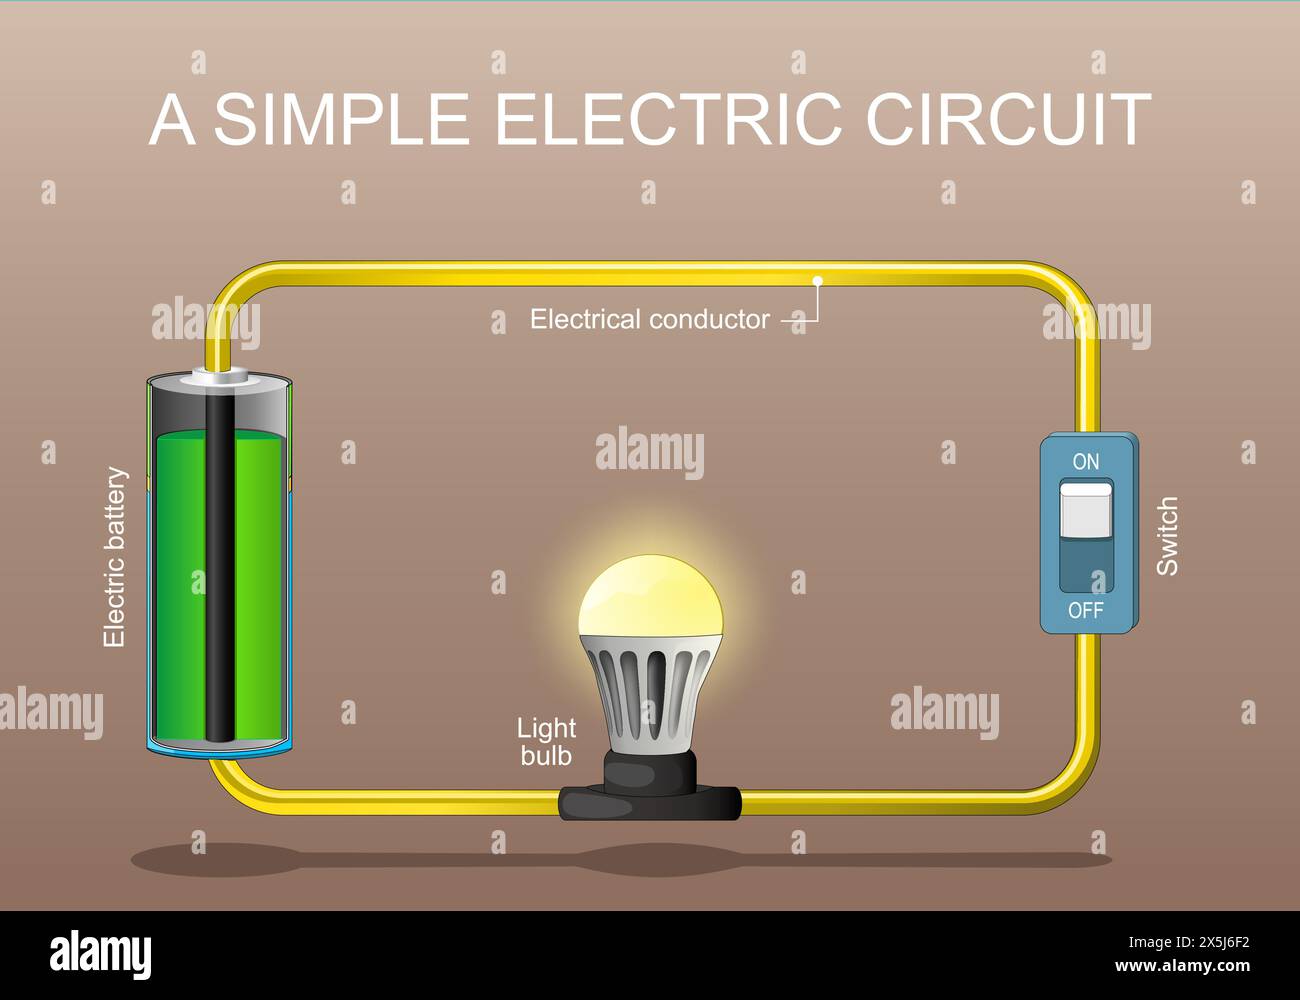 Components of a Simple electric circuit. Switch, light bulb, wire and battery. Isometric Flat vector illustration. Stock Vector